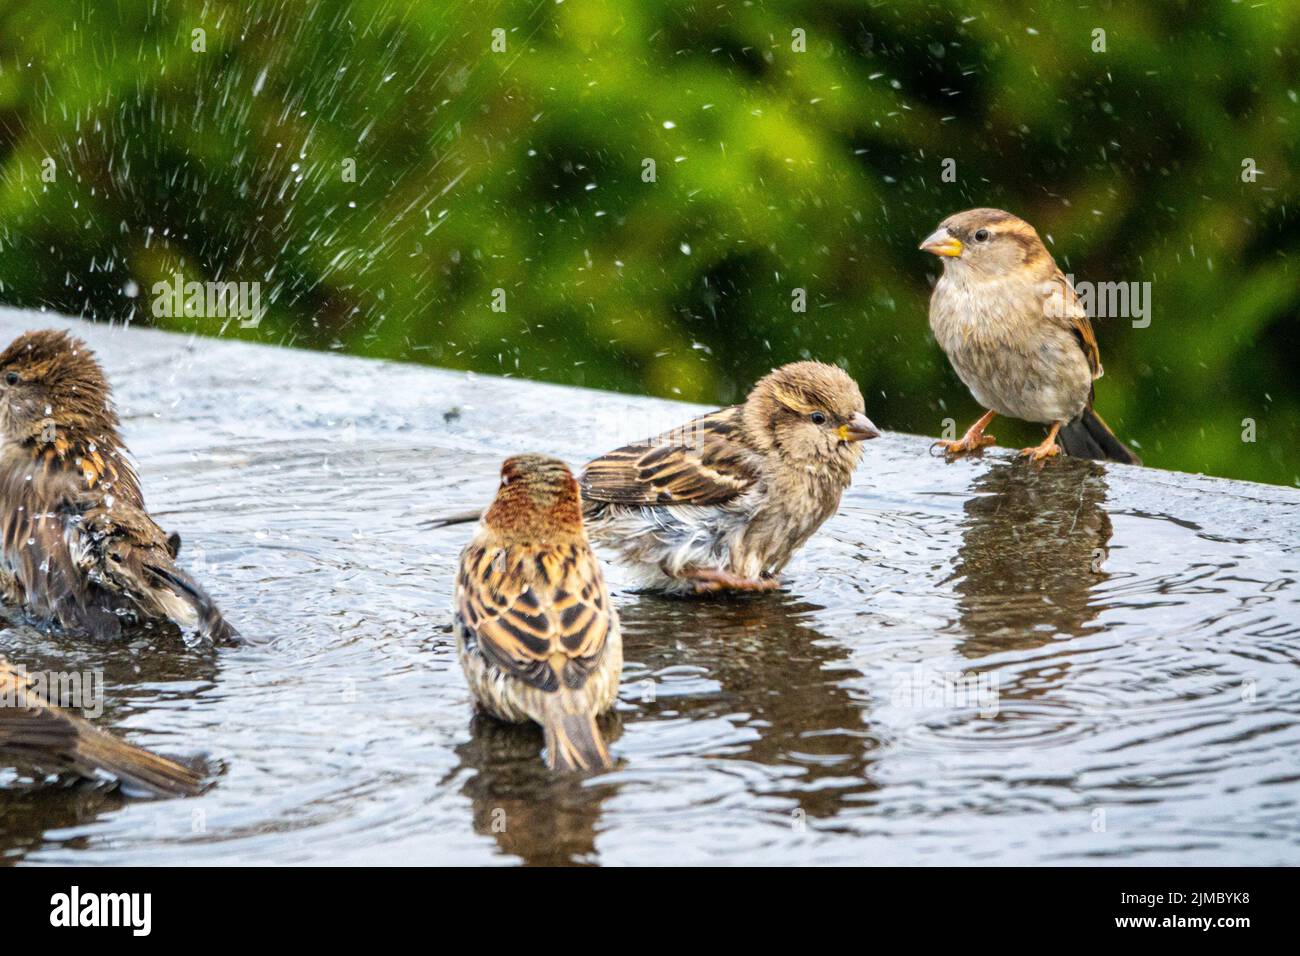 A group of house sparrows ( Passer domesticus) bathing in water on a flat house roof. Spotted whilst birding by bird photographer. Stock Photo